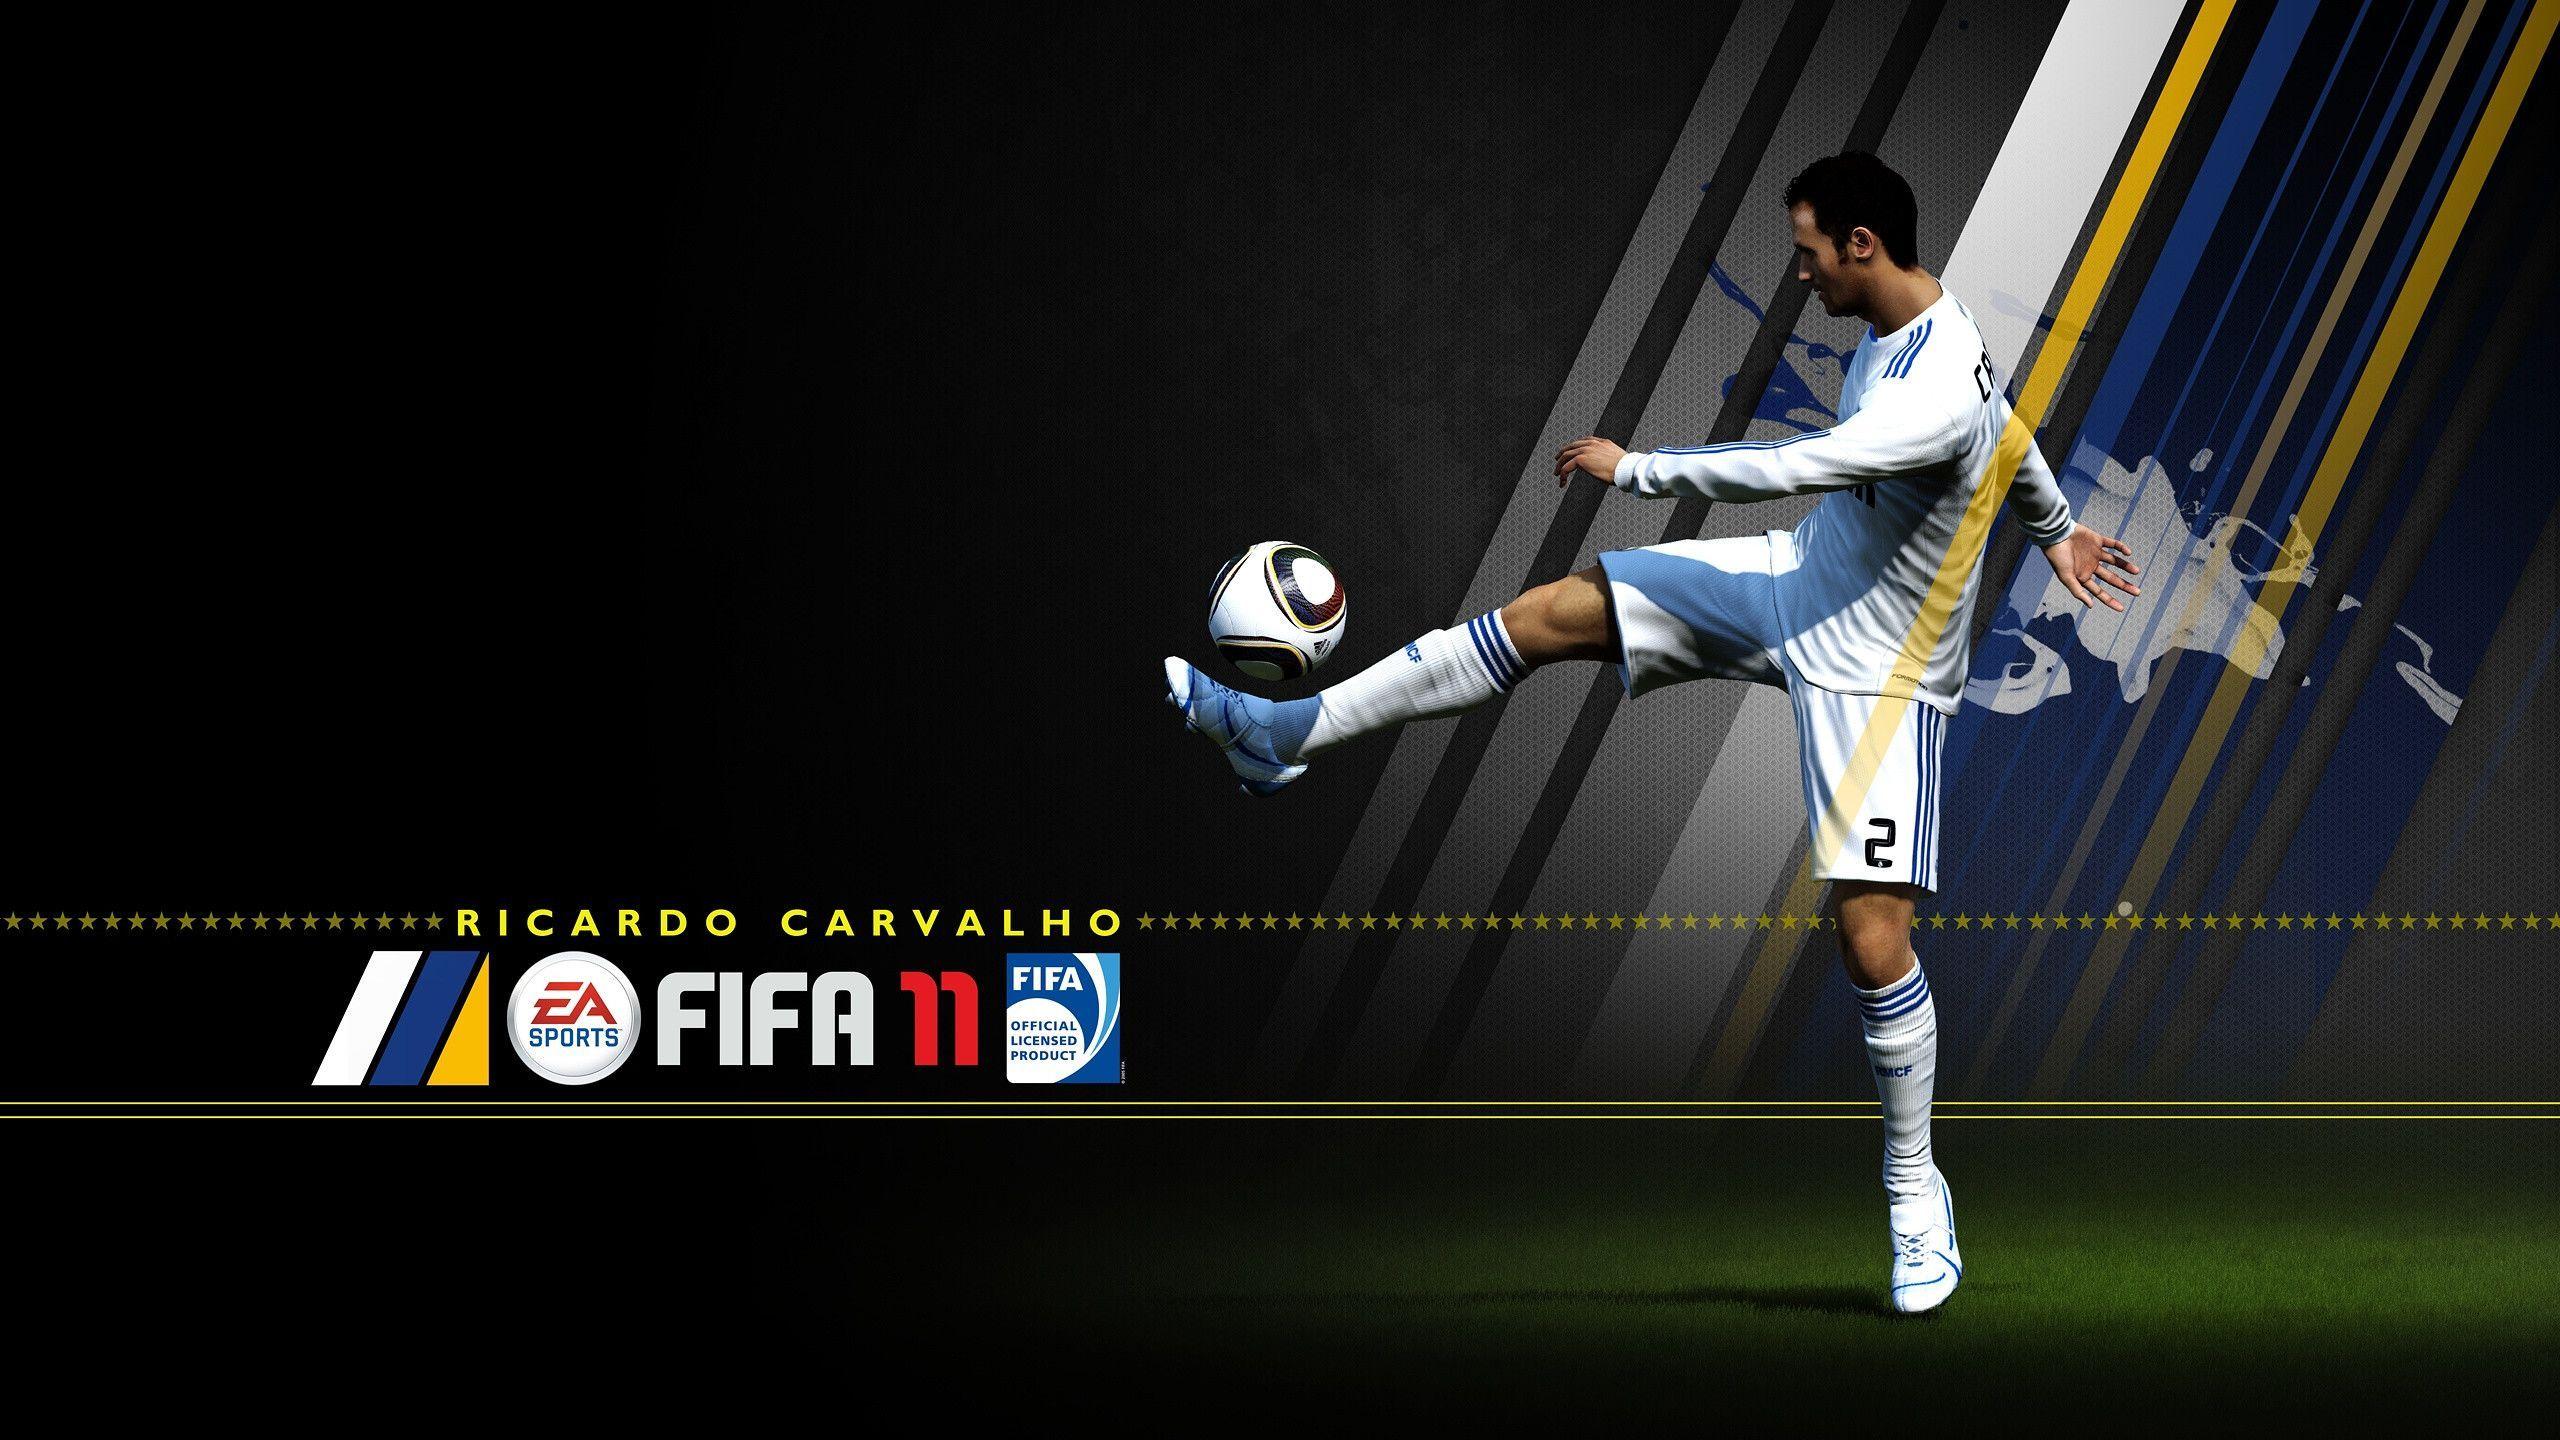 FIFA 11 HD Wallpapers Theme for Windows 7